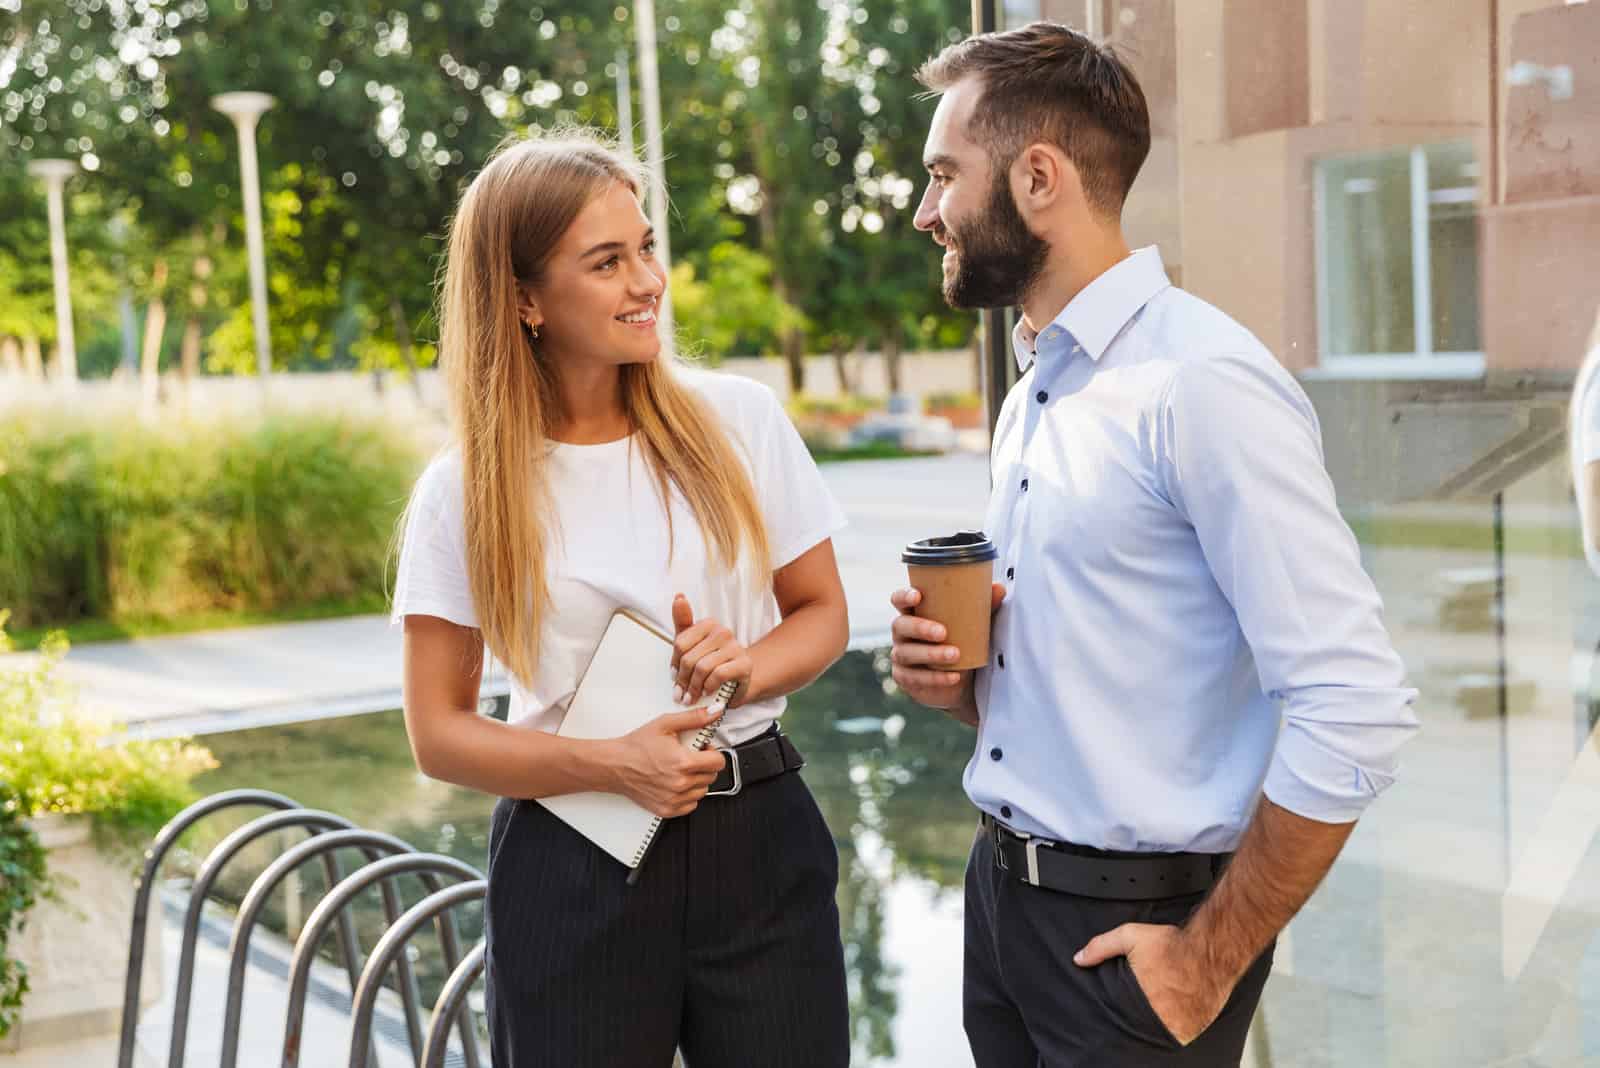 a smiling man and woman stand outdoors and talk